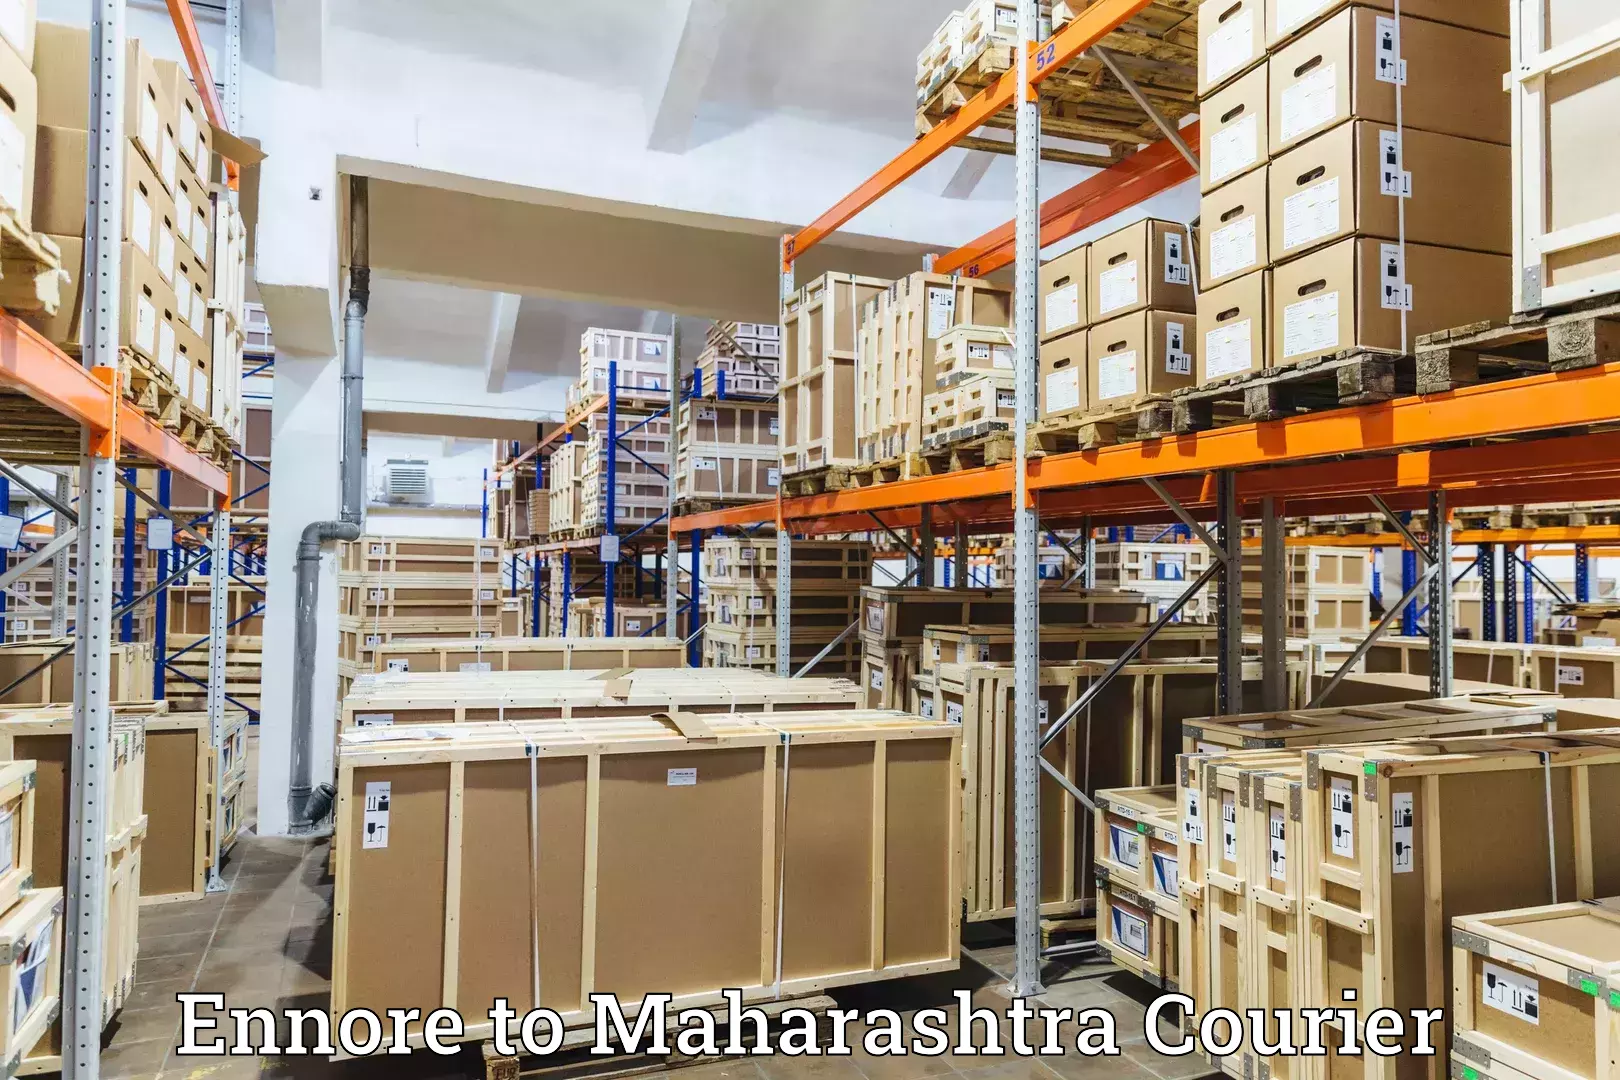 Subscription-based courier Ennore to Mahabaleshwar